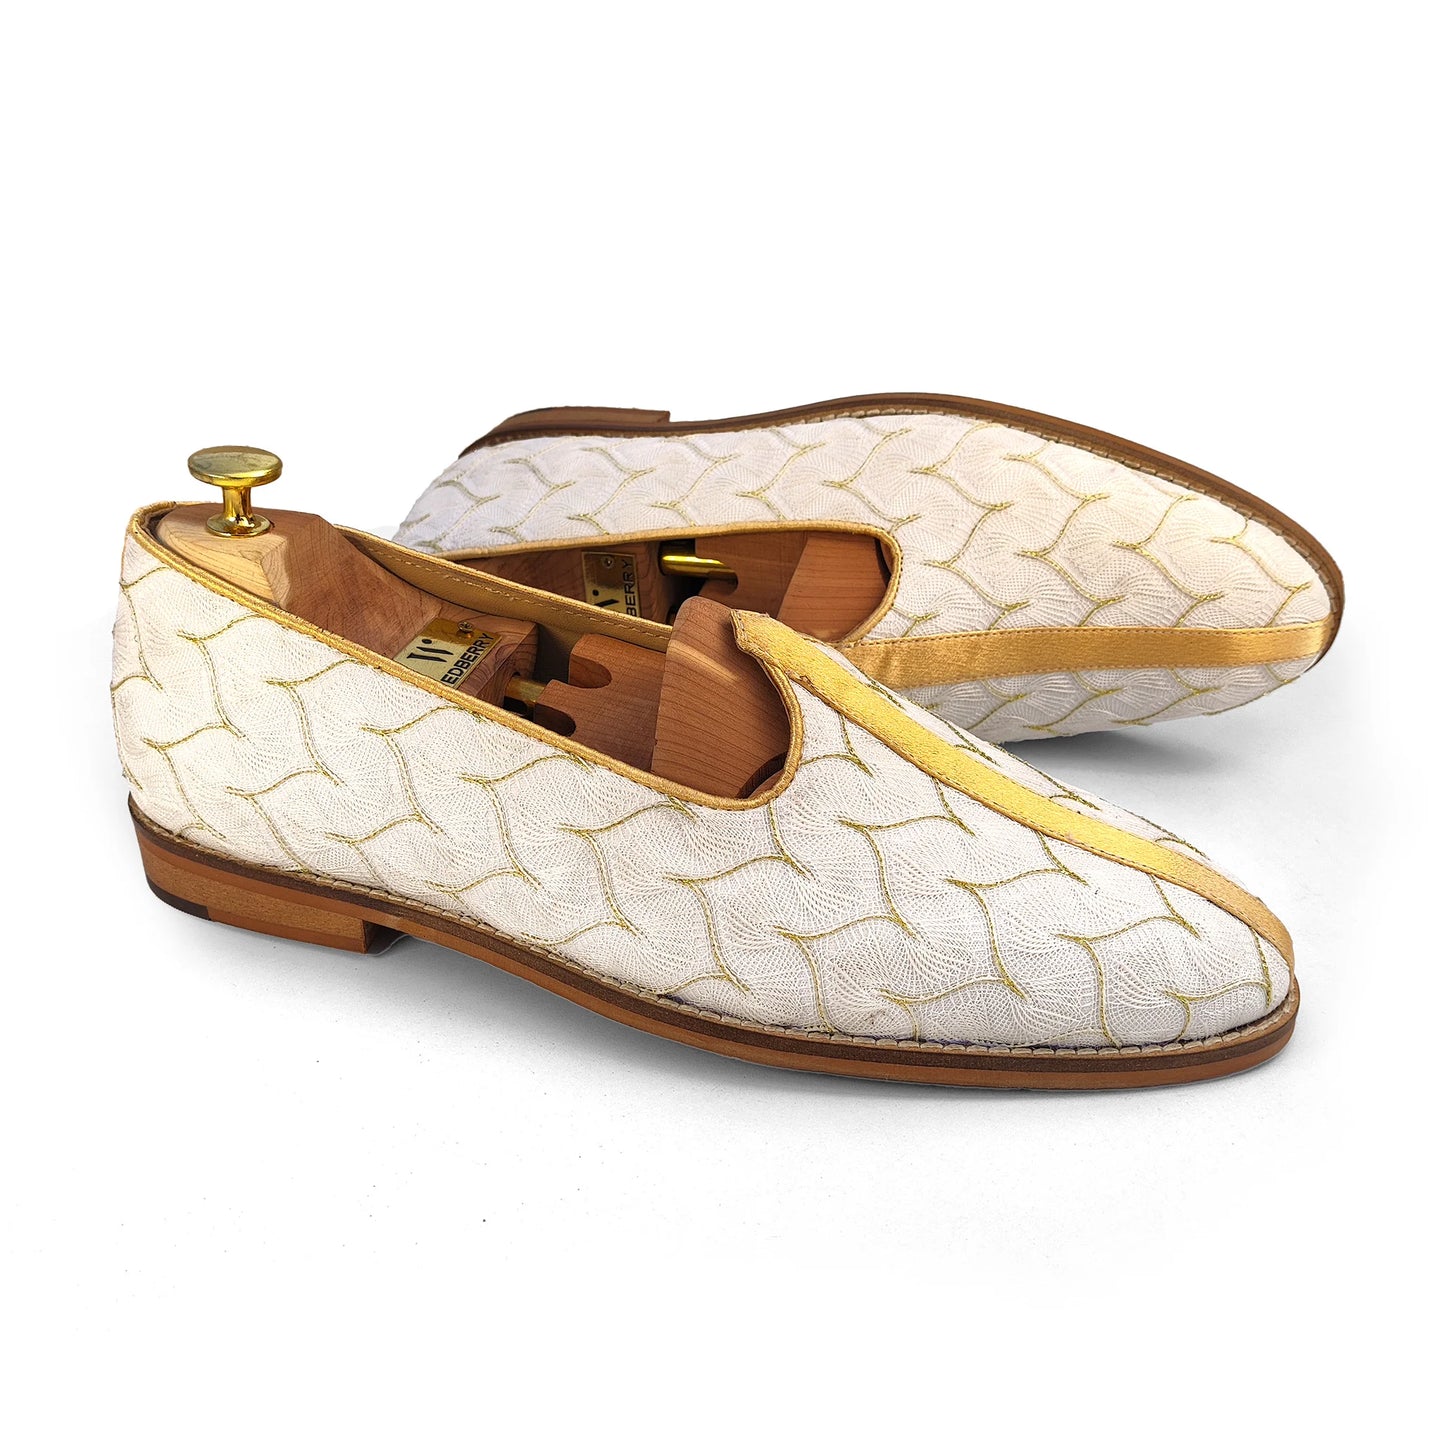 Ivory White with Gold Embroidery Wedding Shoes Ethnic Loafers Mojari Slipon for Men